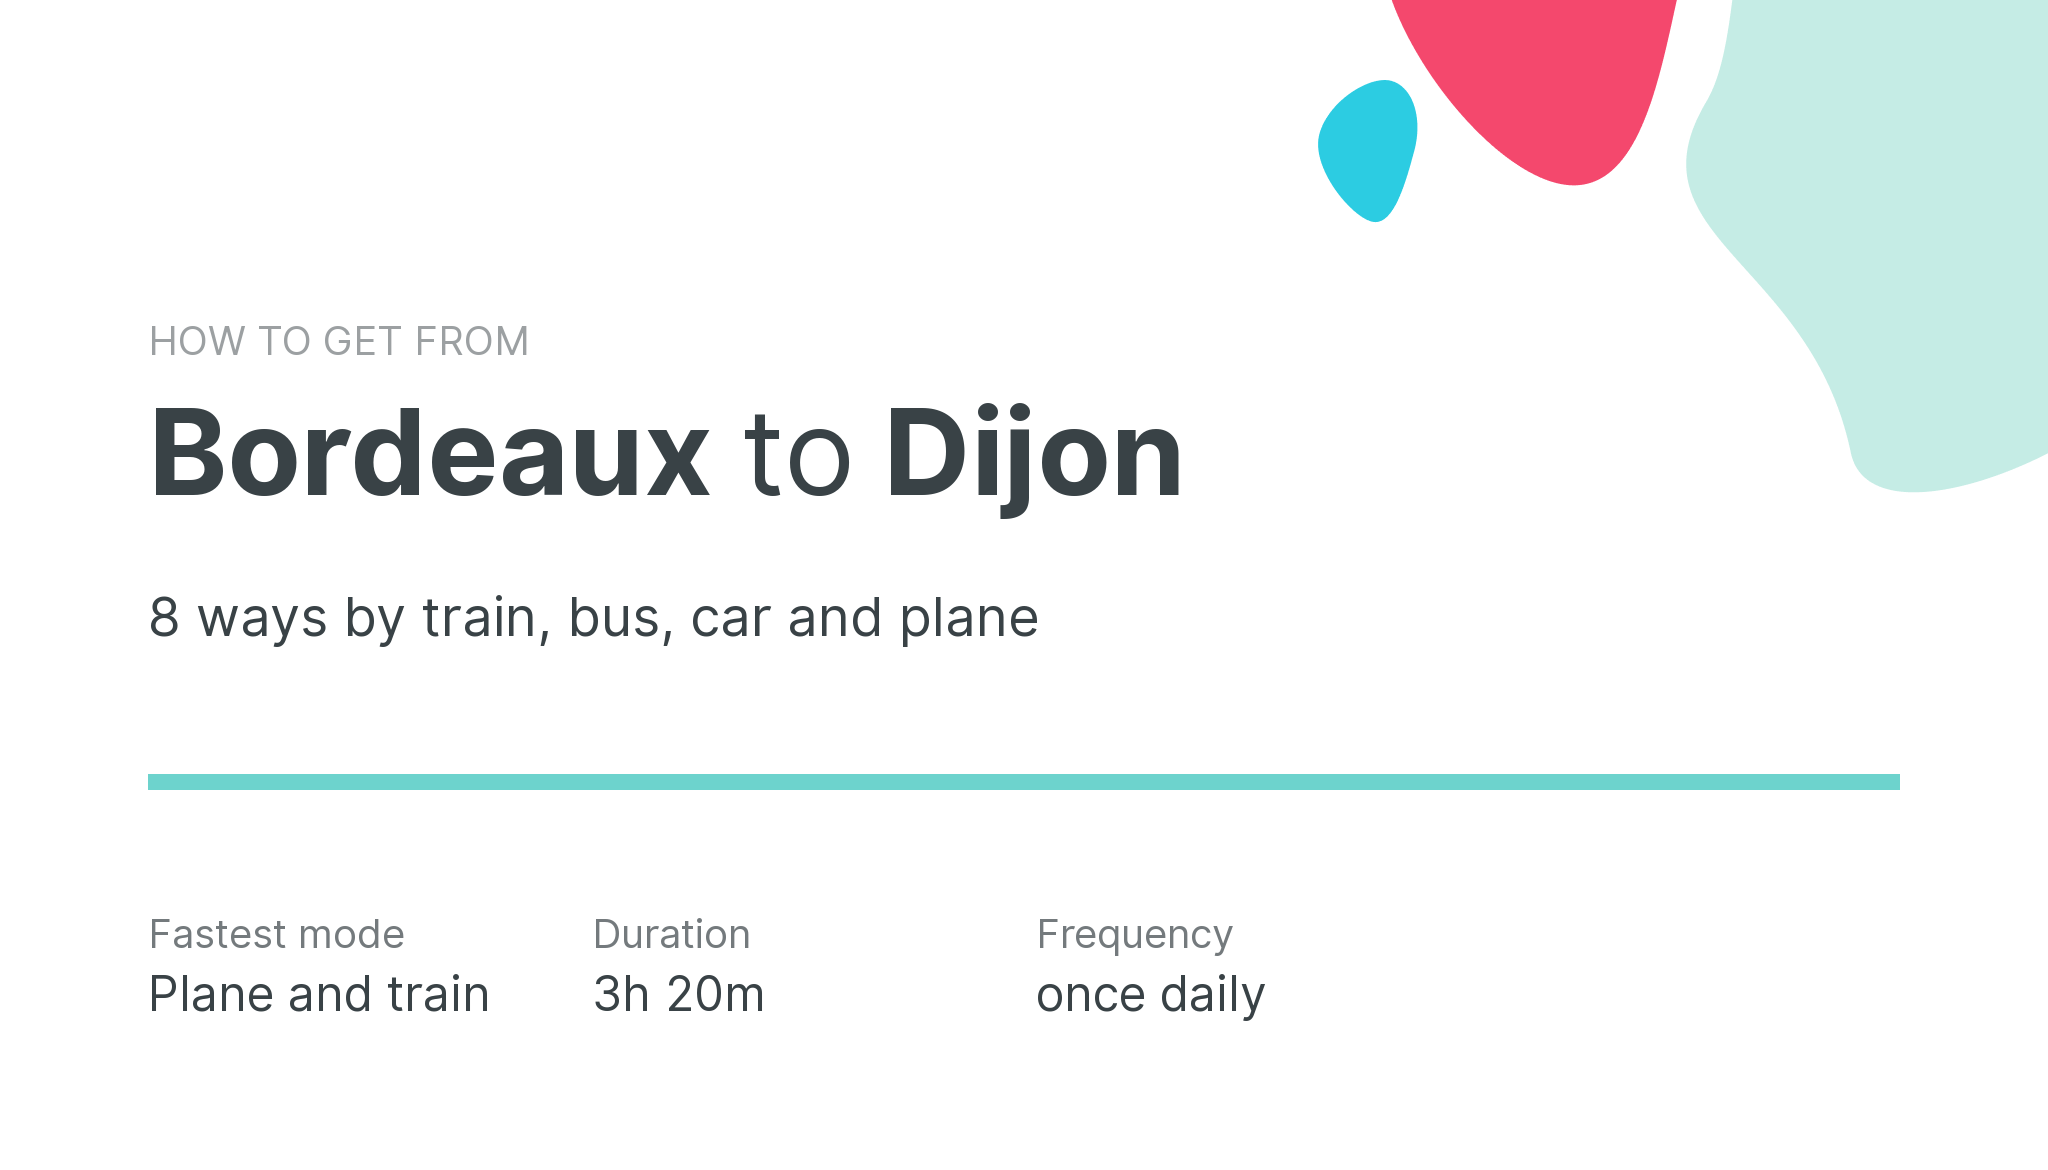 How do I get from Bordeaux to Dijon